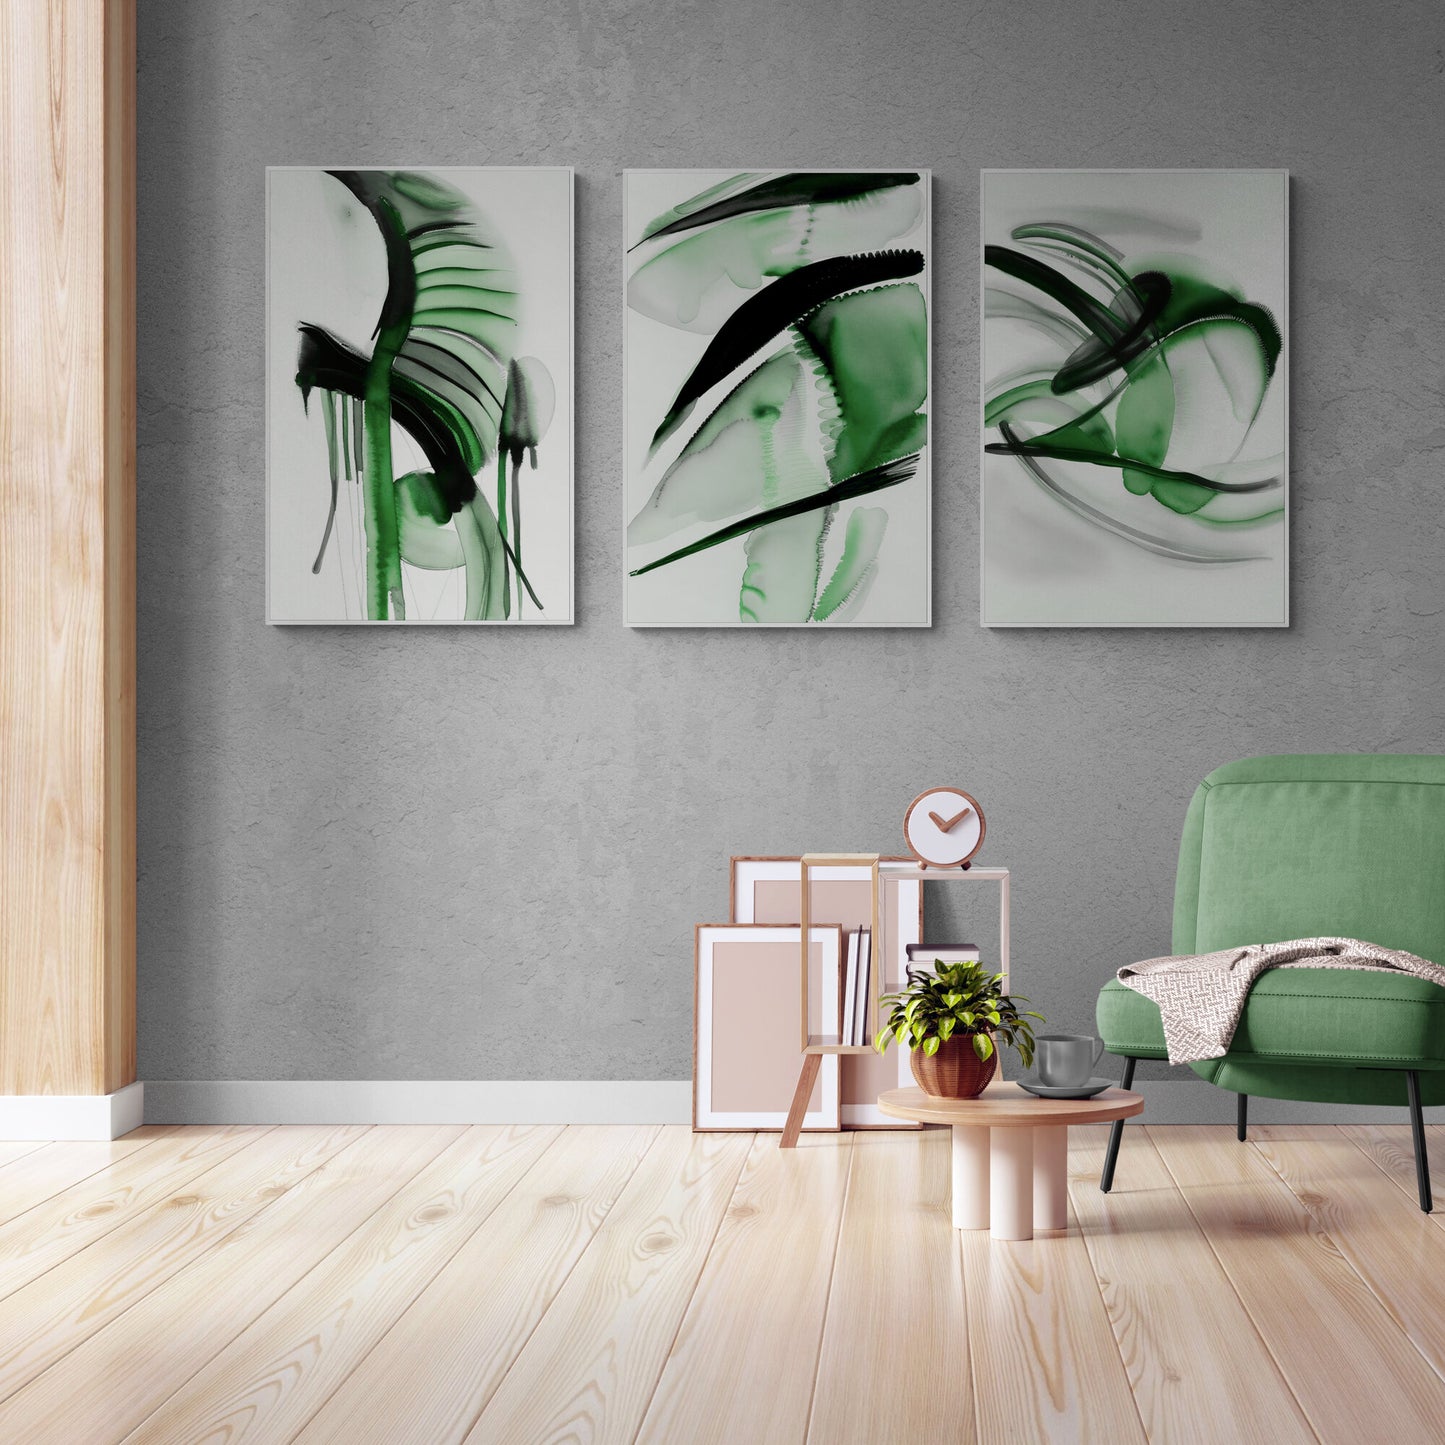 Abstract Sage Green Wall Art Set of 3 Watercolor Paintings Modern Paper Poster Prints Green Black White 3 Piece Triptych Artwork